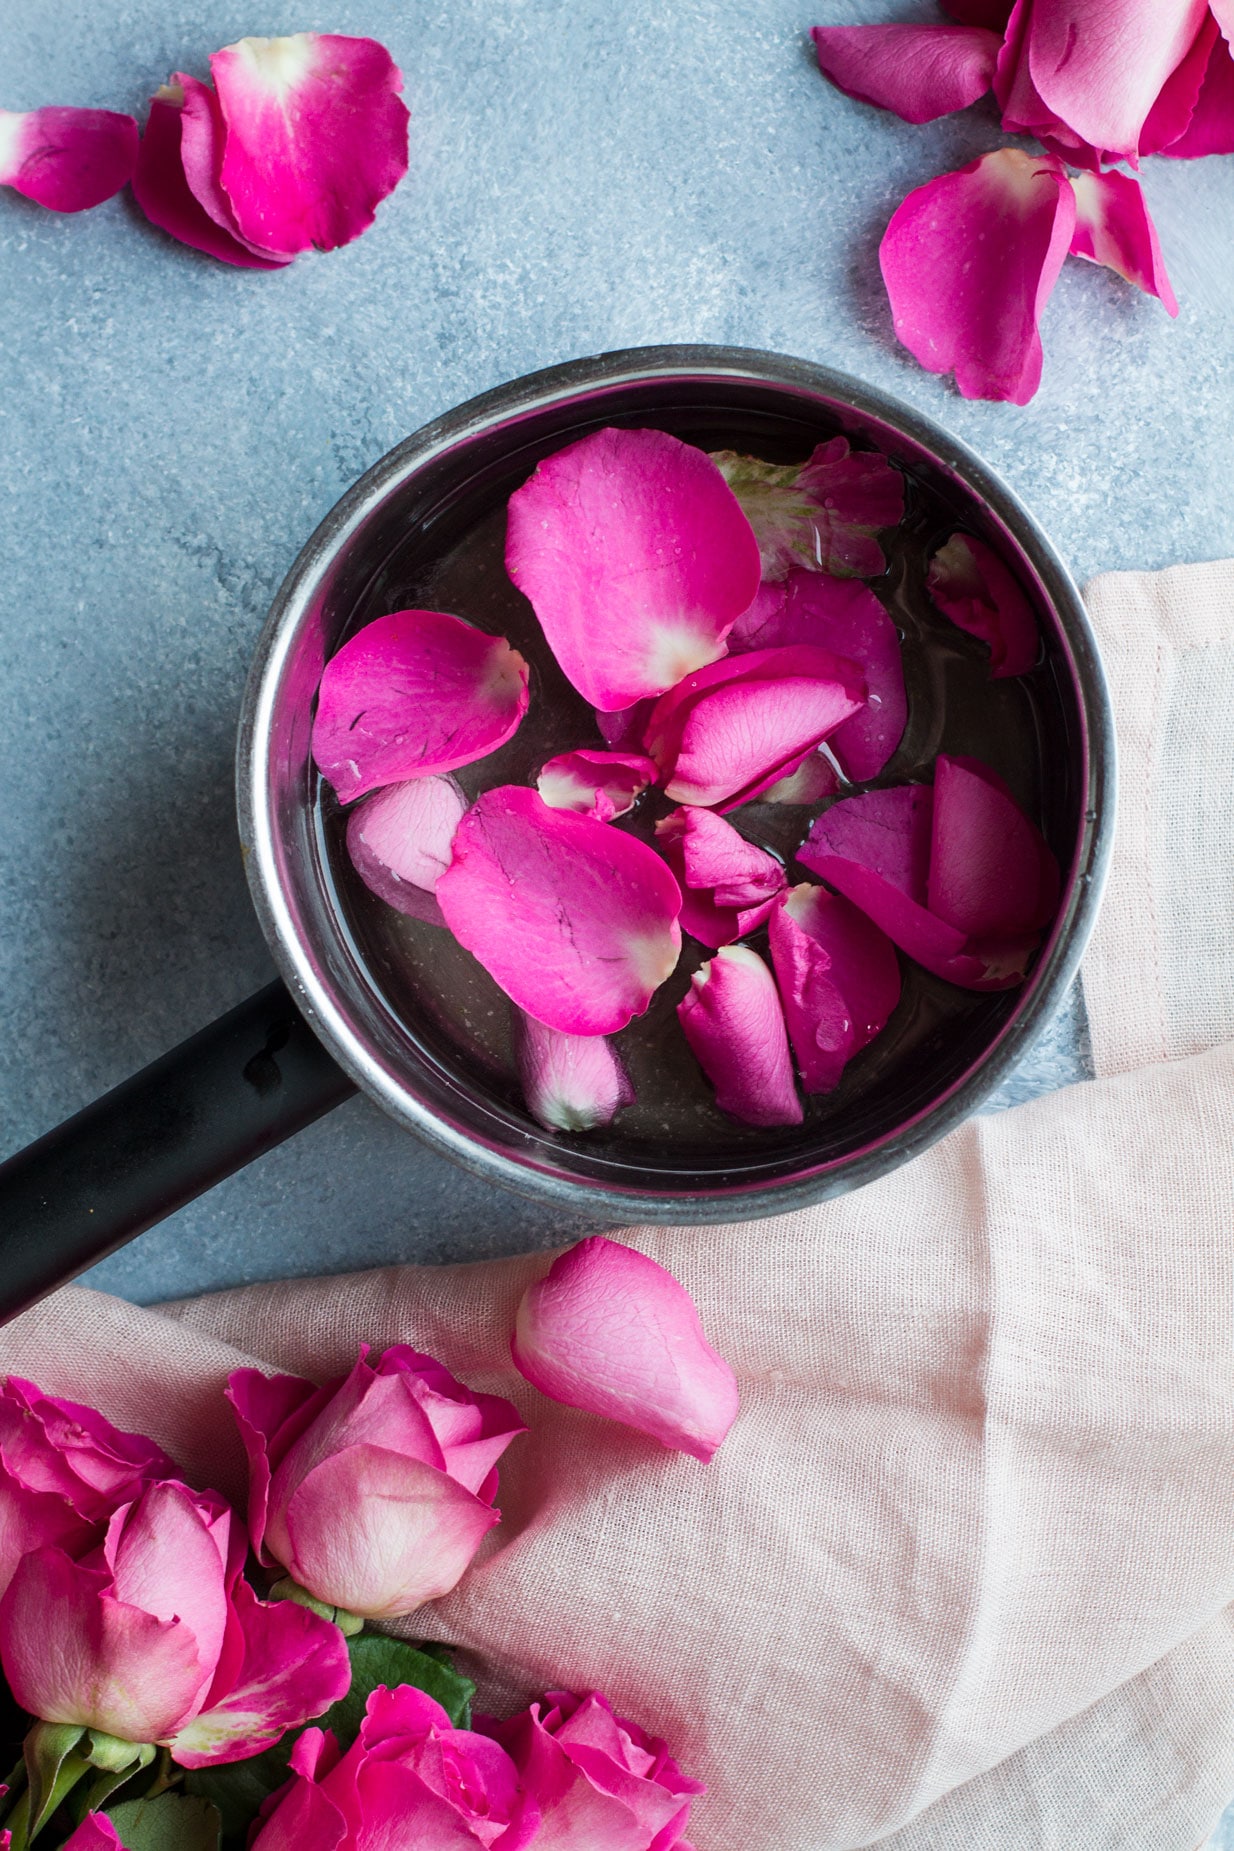 Bird's eye view of a saucepan with pink rose petals. Roses in the bottom left corner, blue background and pink cloth.